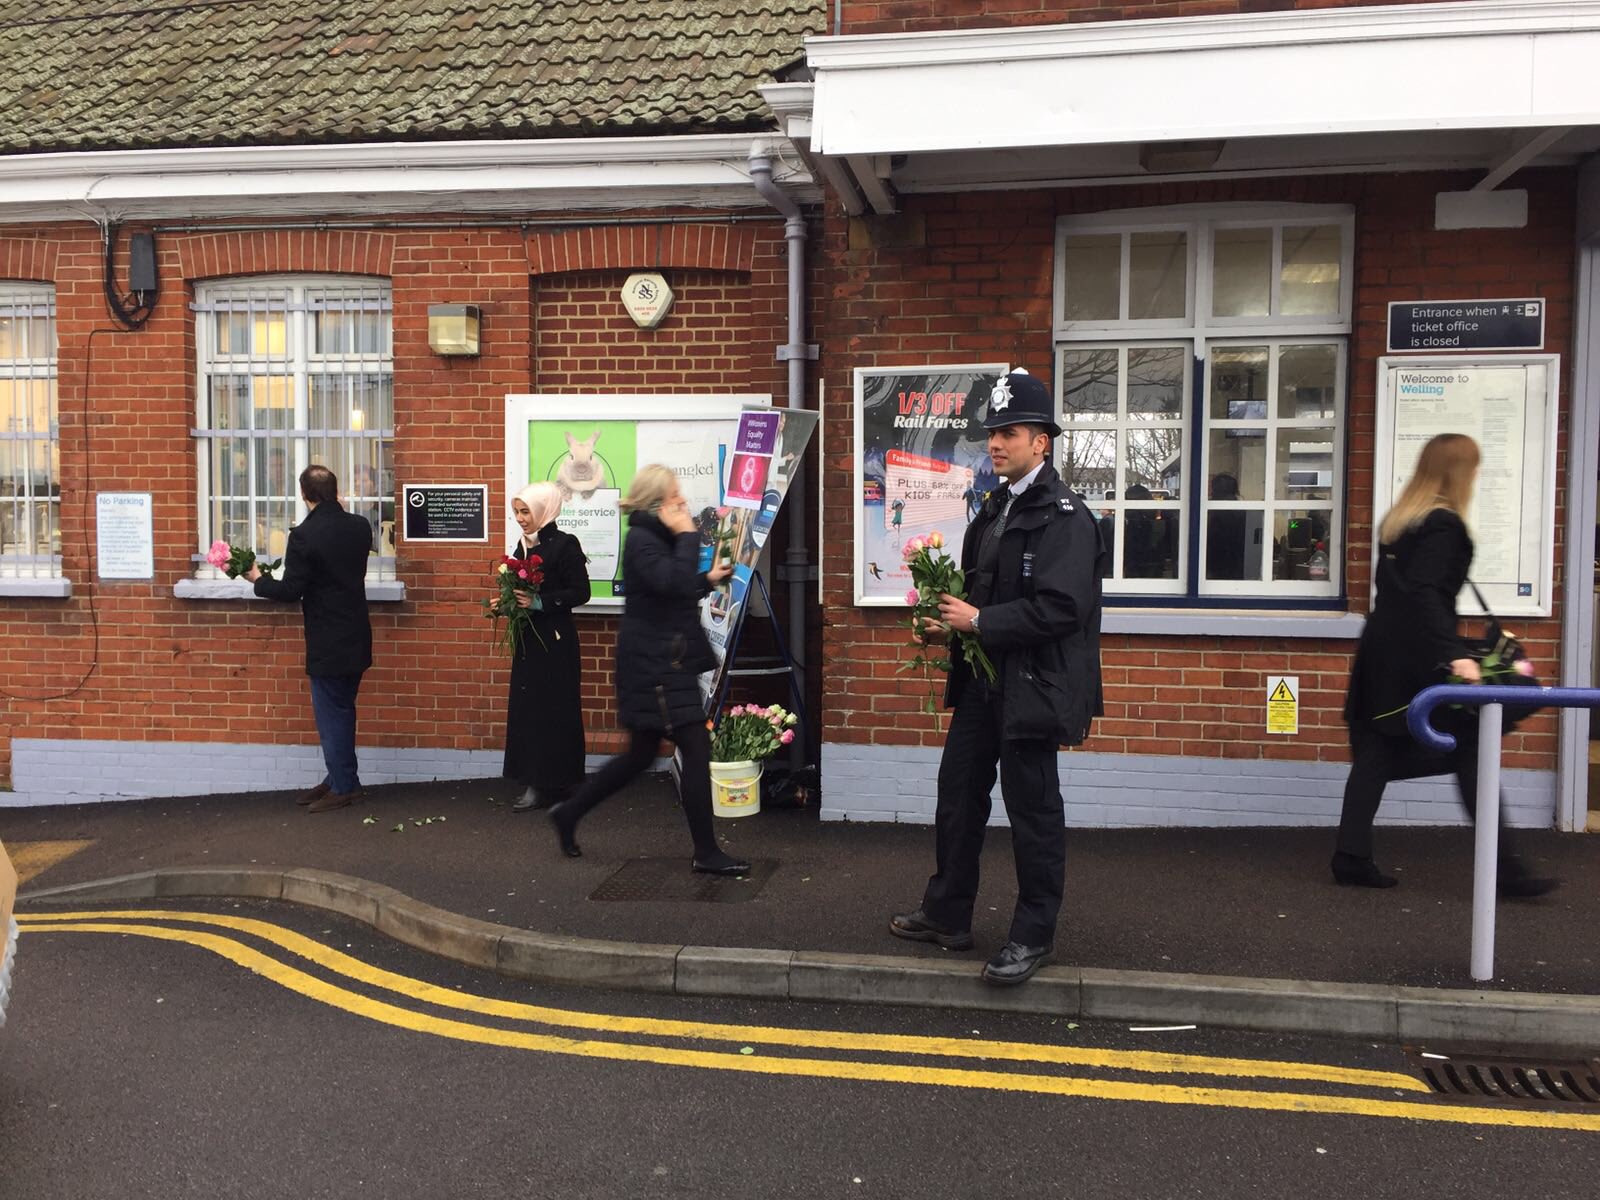 Police hand out roses at Welling station for International Women's Day